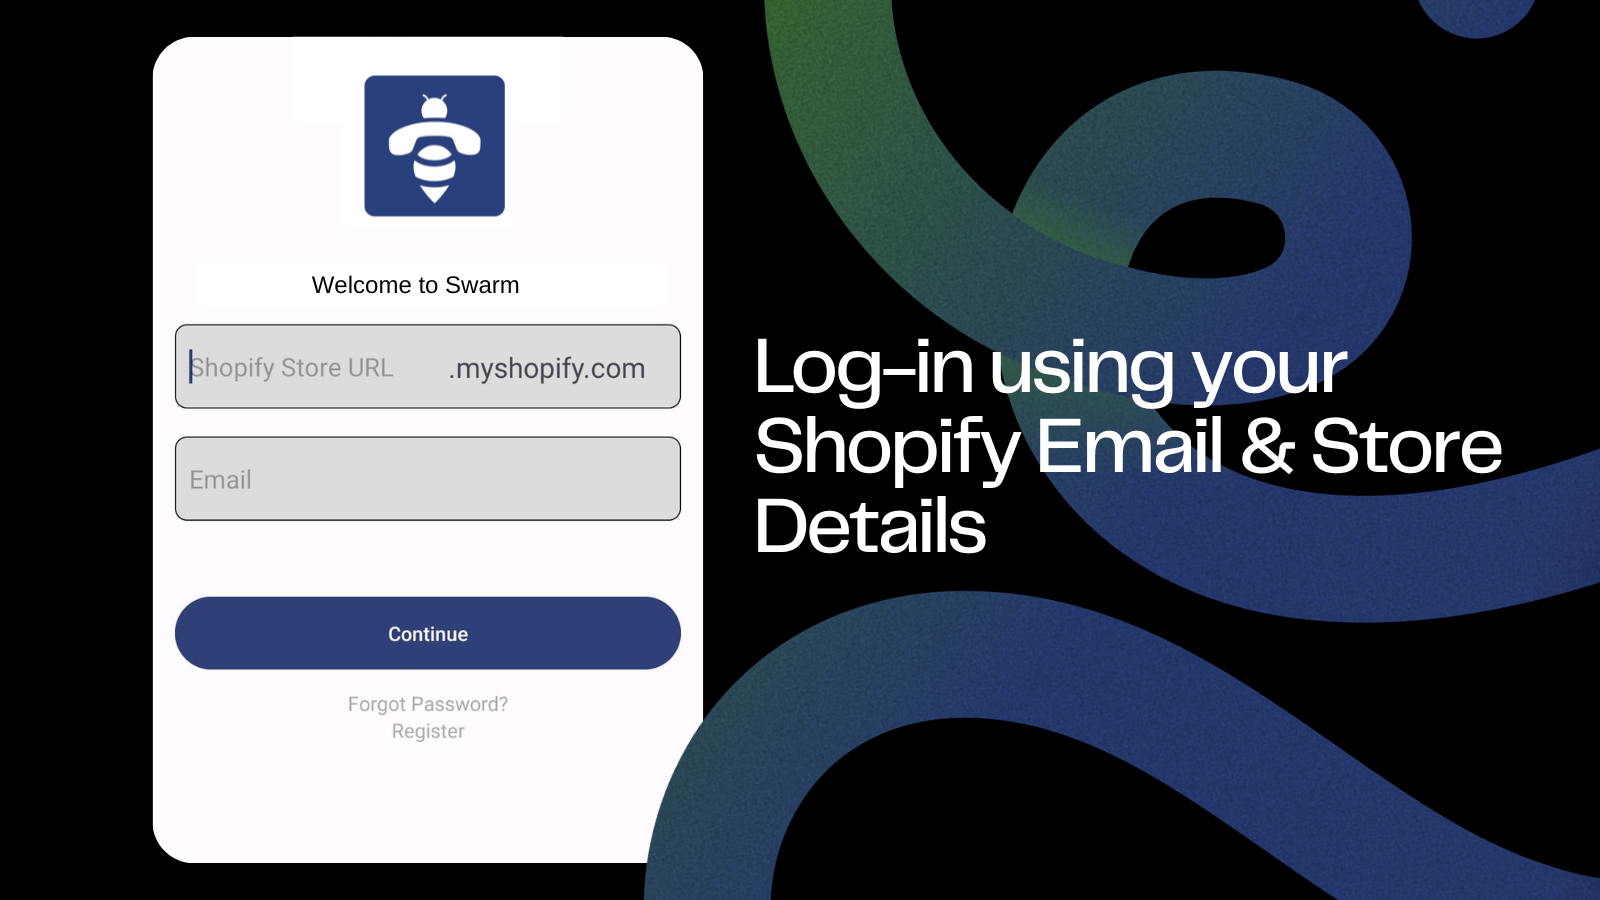 Login using your Shopify store details